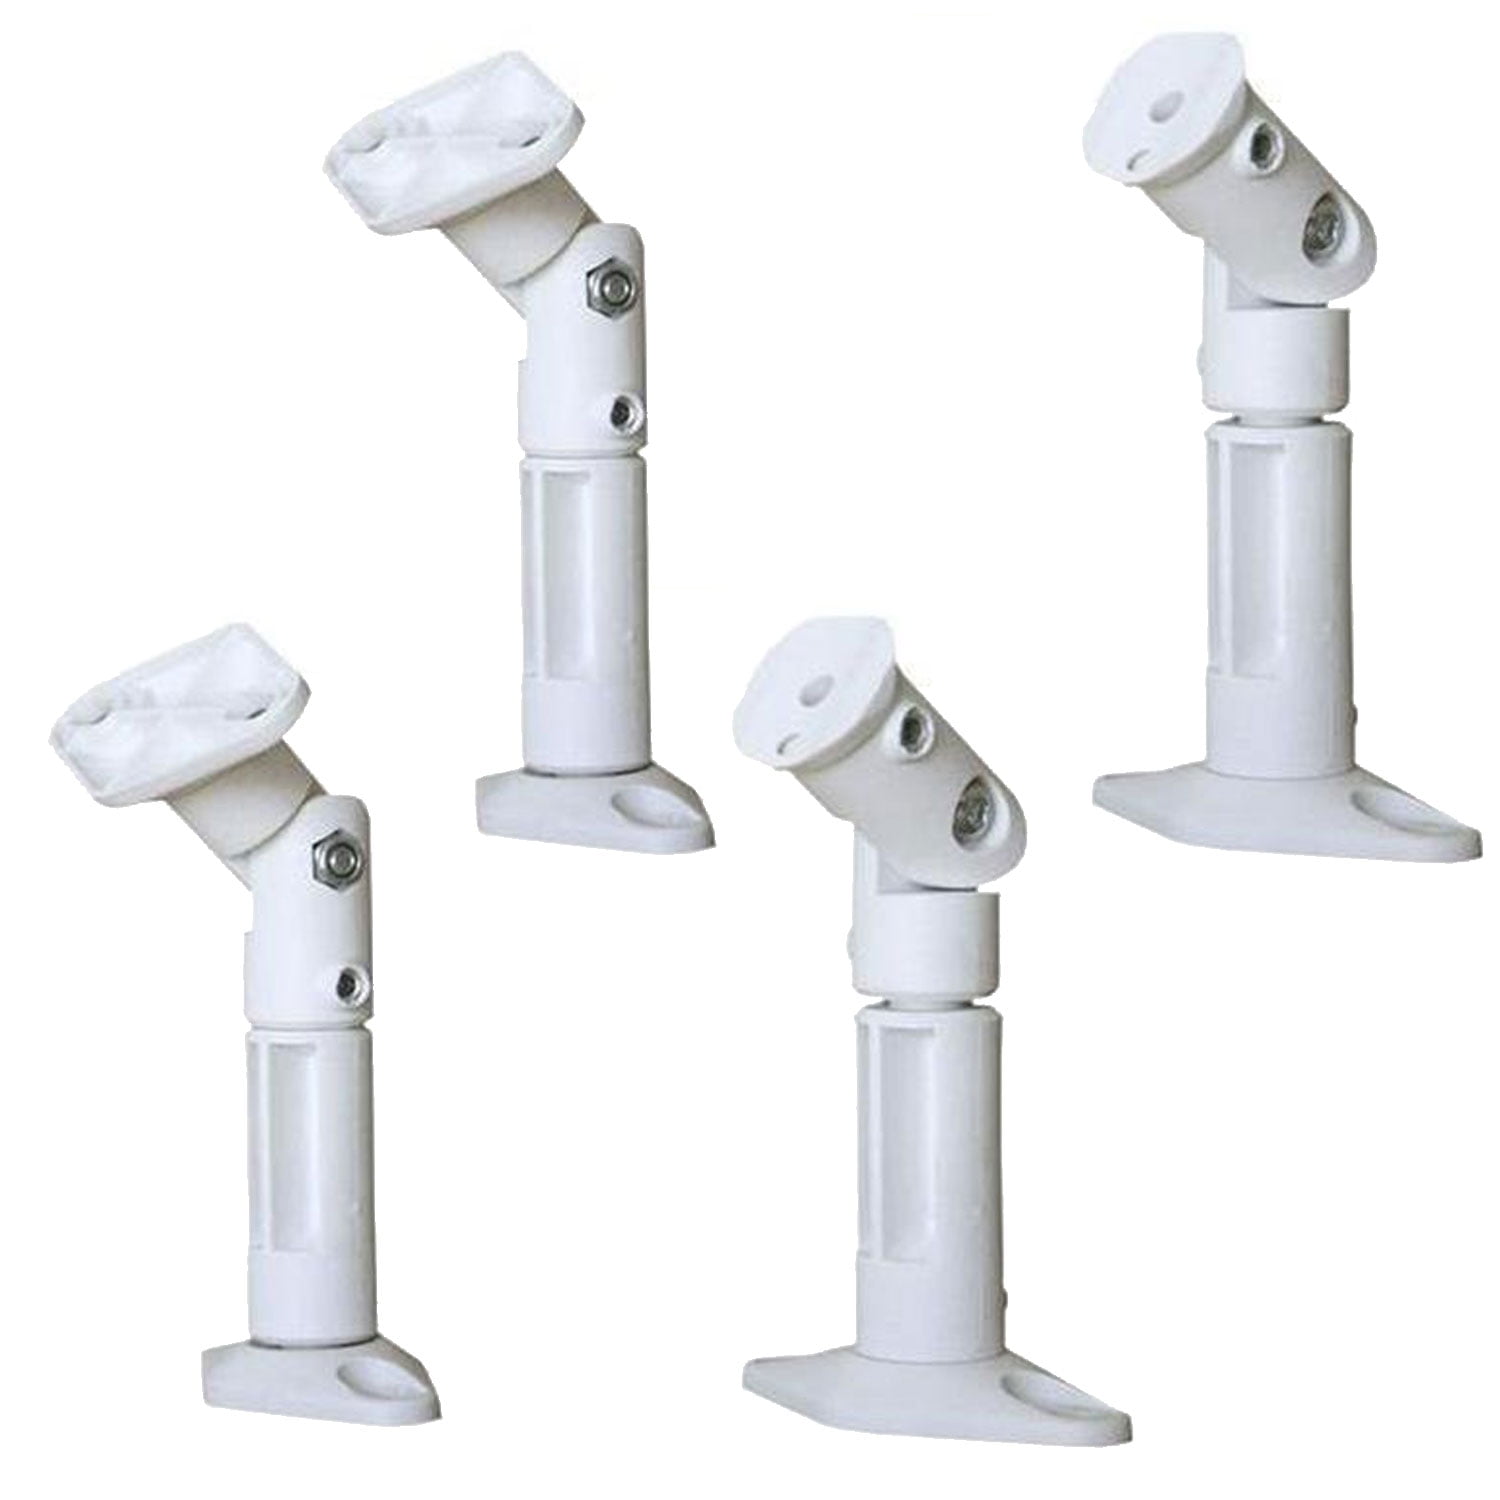 4 PACK UNIVERSAL CEILING WALL SATELLITE SPEAKER MOUNT BRACKETS HOME THEATER BOSE 